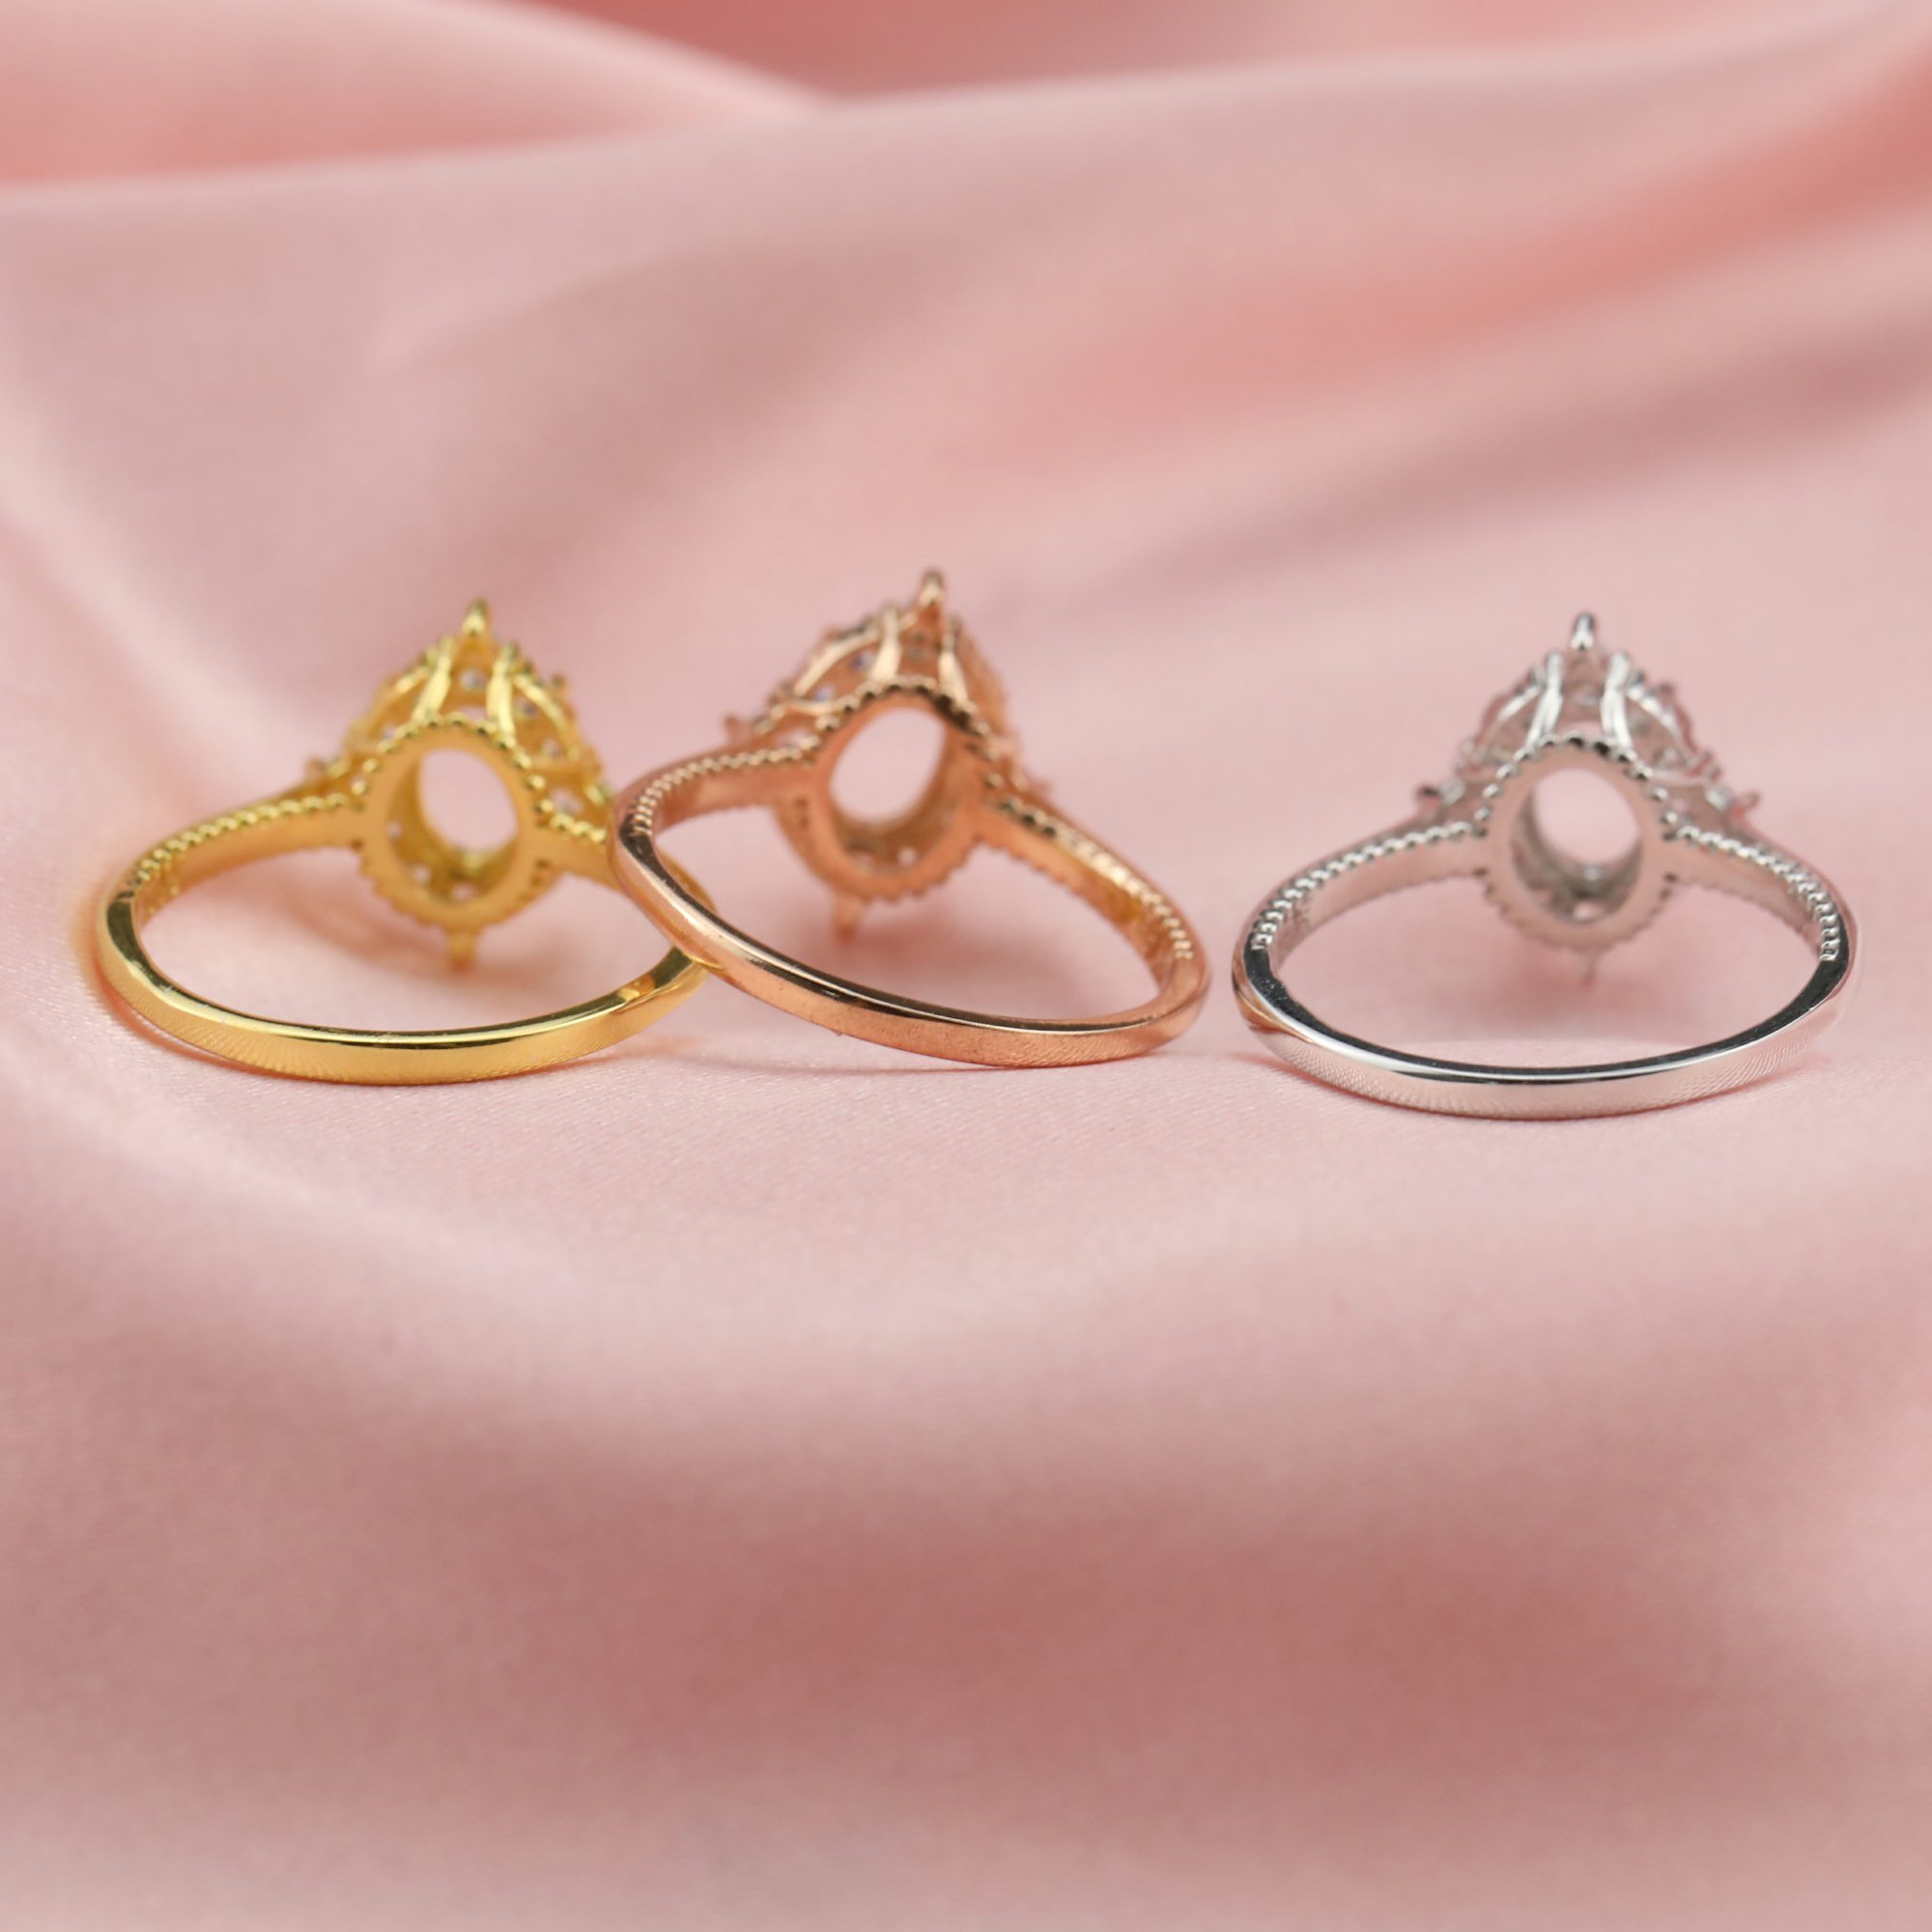 5x7MM Keepsake Breast Milk Oval Prong Ring Settings Resin Solid 14K Gold Moissanite Accents DIY Ring Blank Band for Gemstone 1224119-1 - Click Image to Close